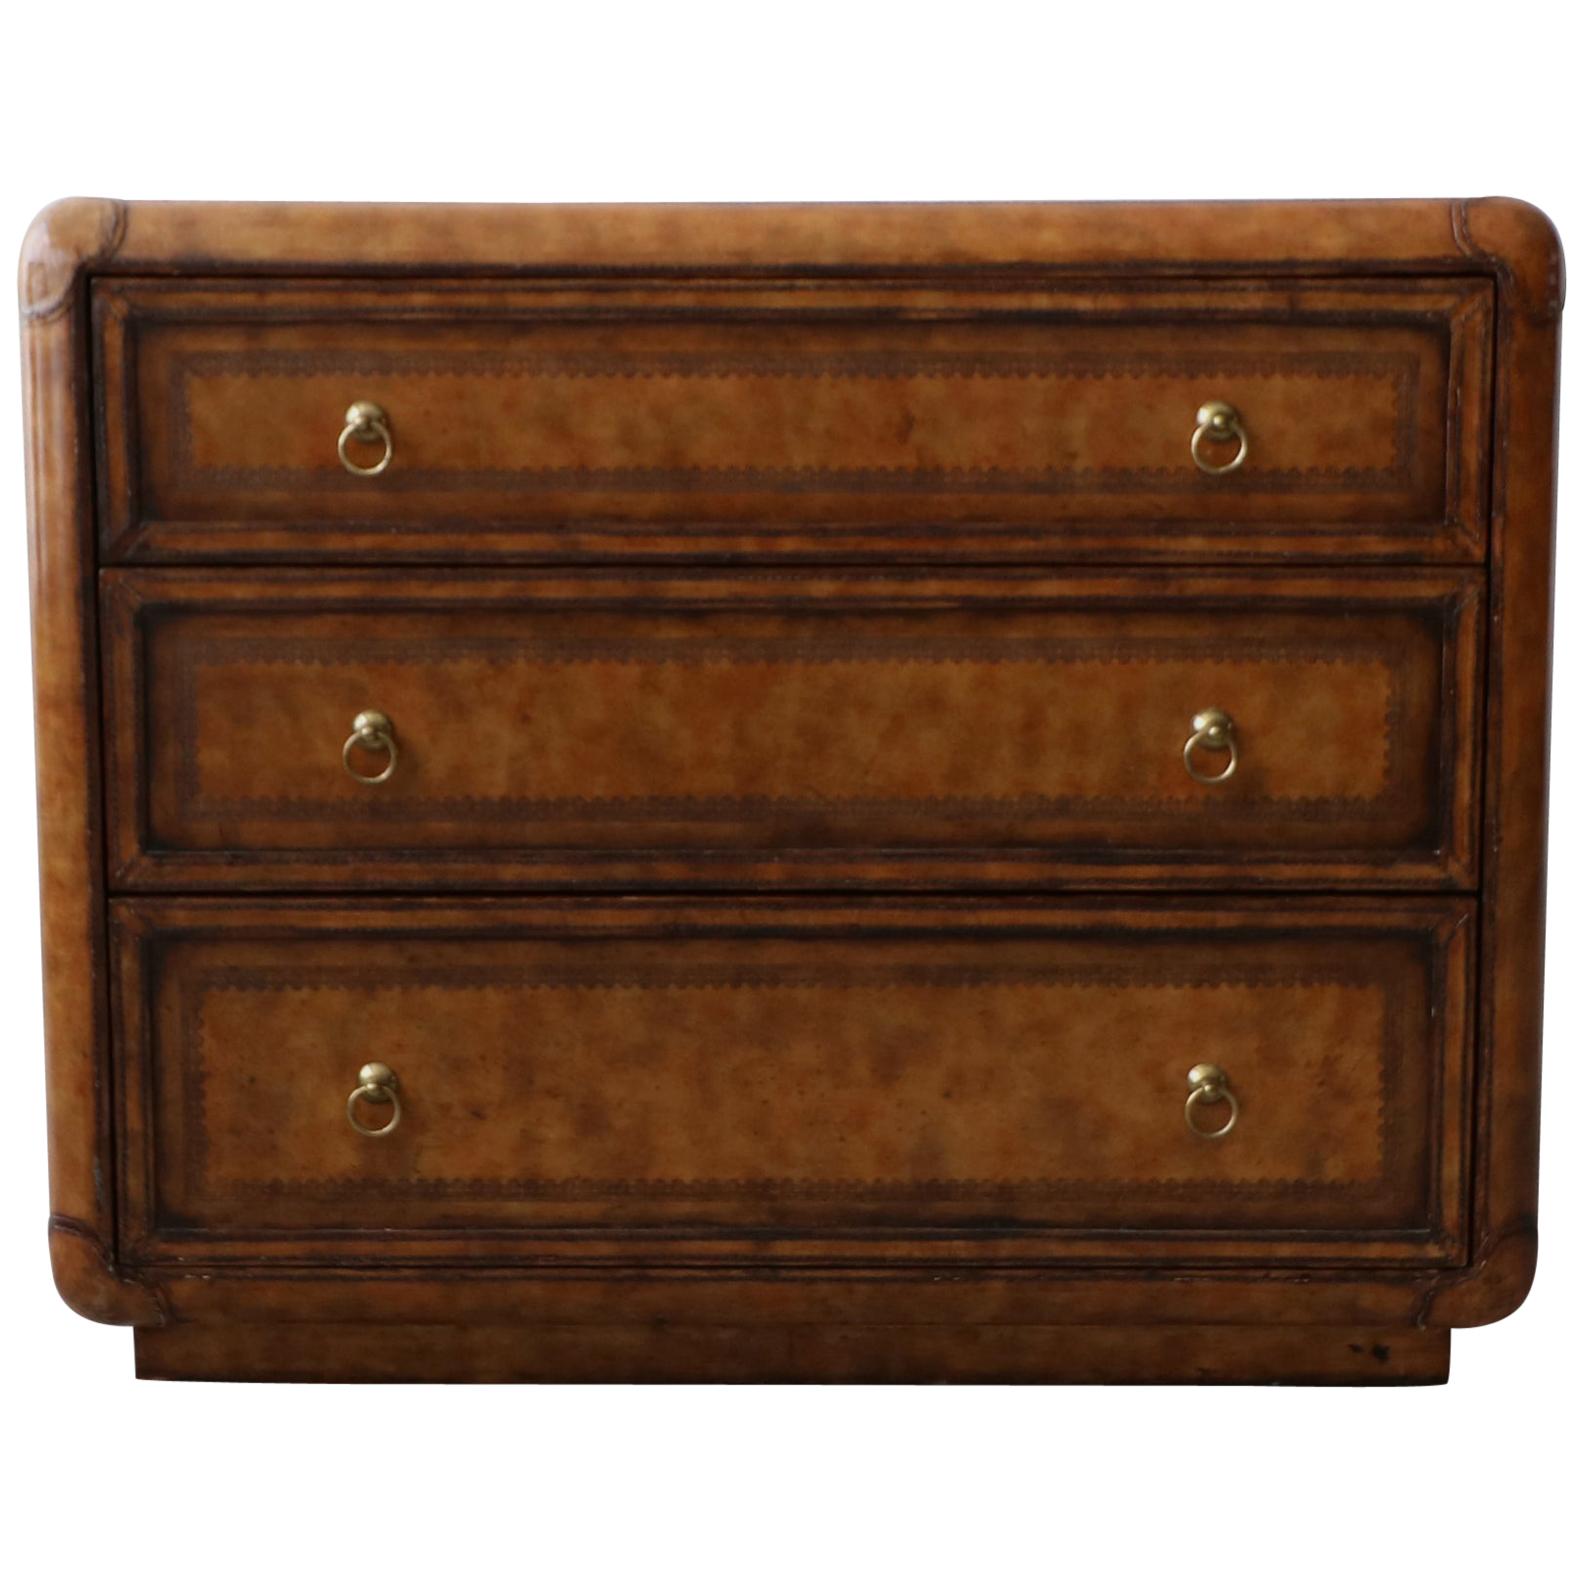 Leather and Brass Dresser Chest by Maitland Smith